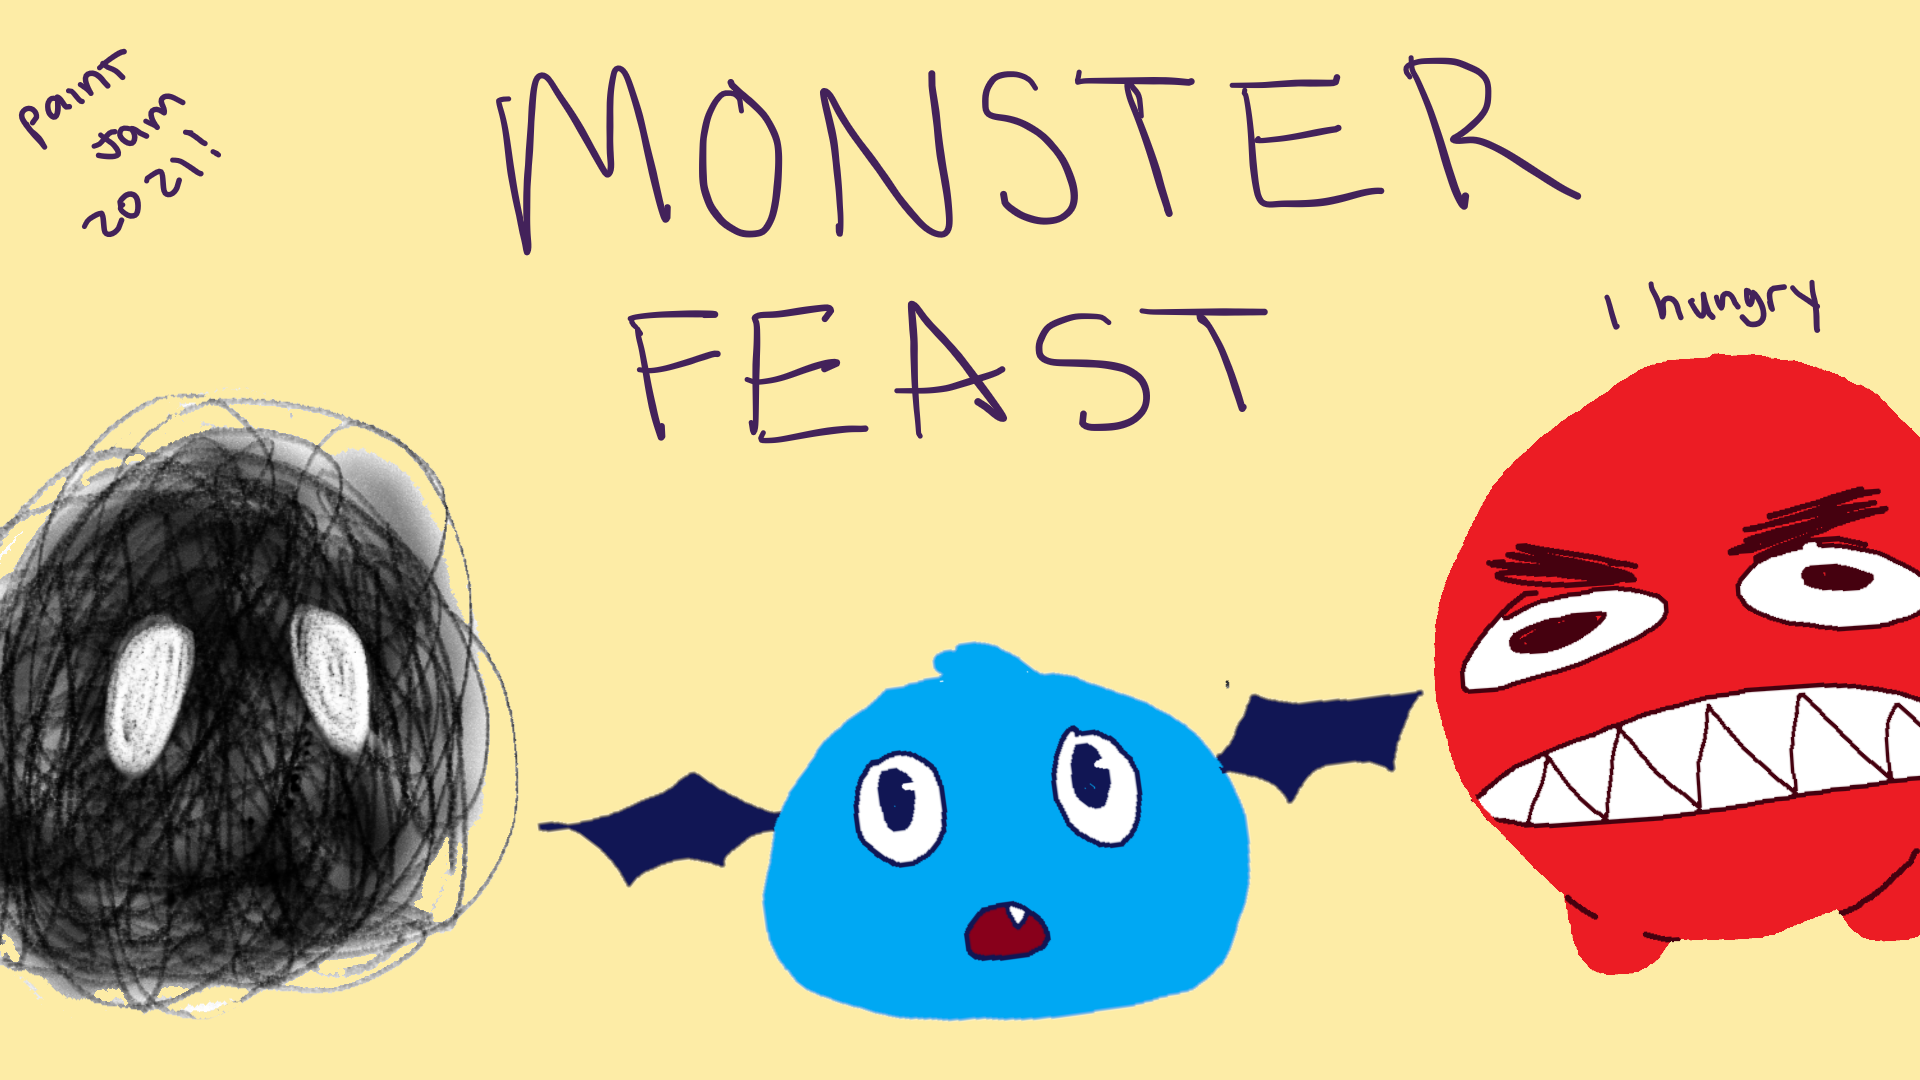 title page for monster feast